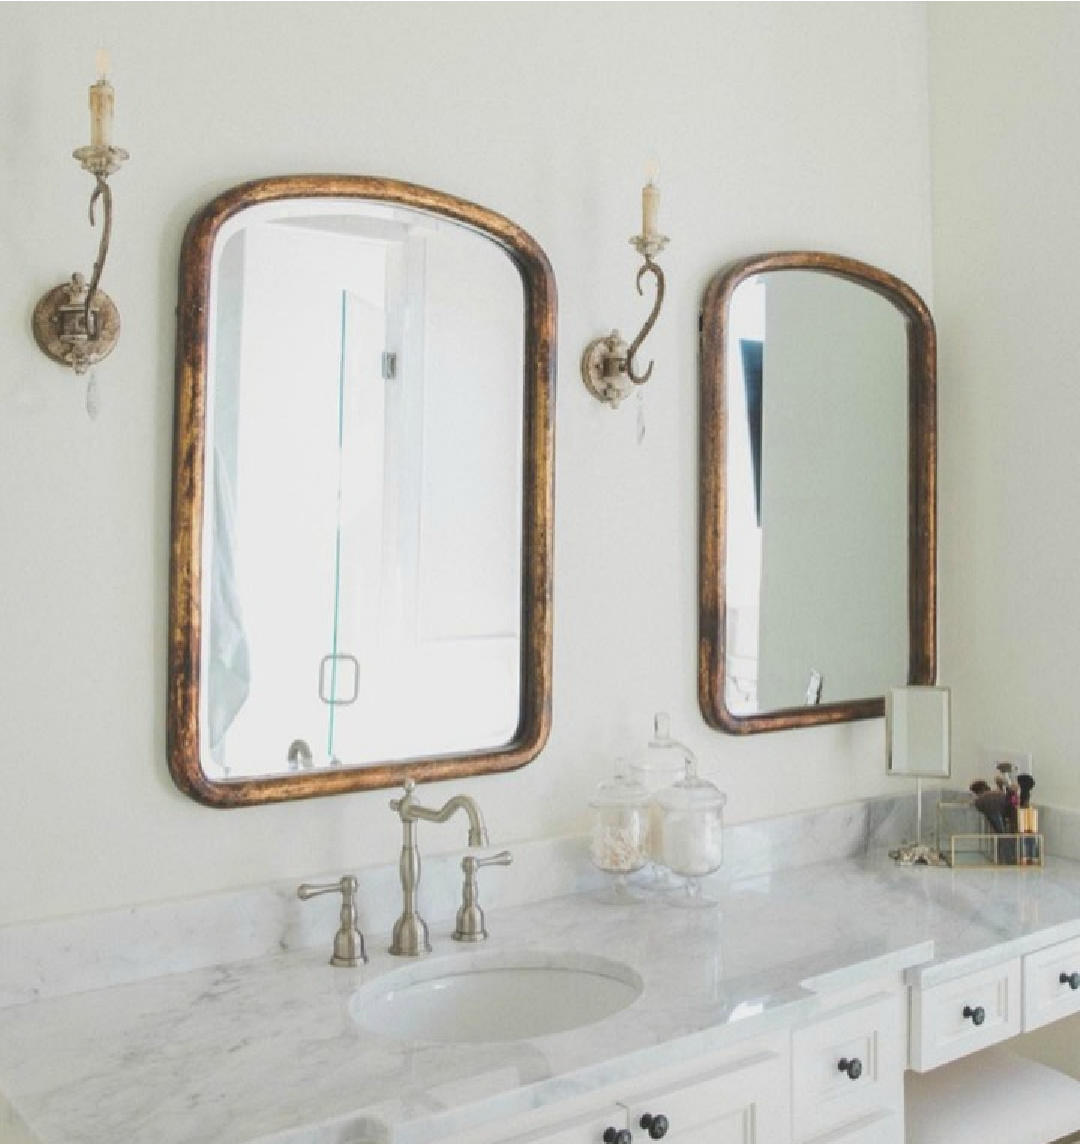 SW Alabaster 7008 paint in a French country bathroom with makeup counter designed by Brittany Jones. #swalabaster